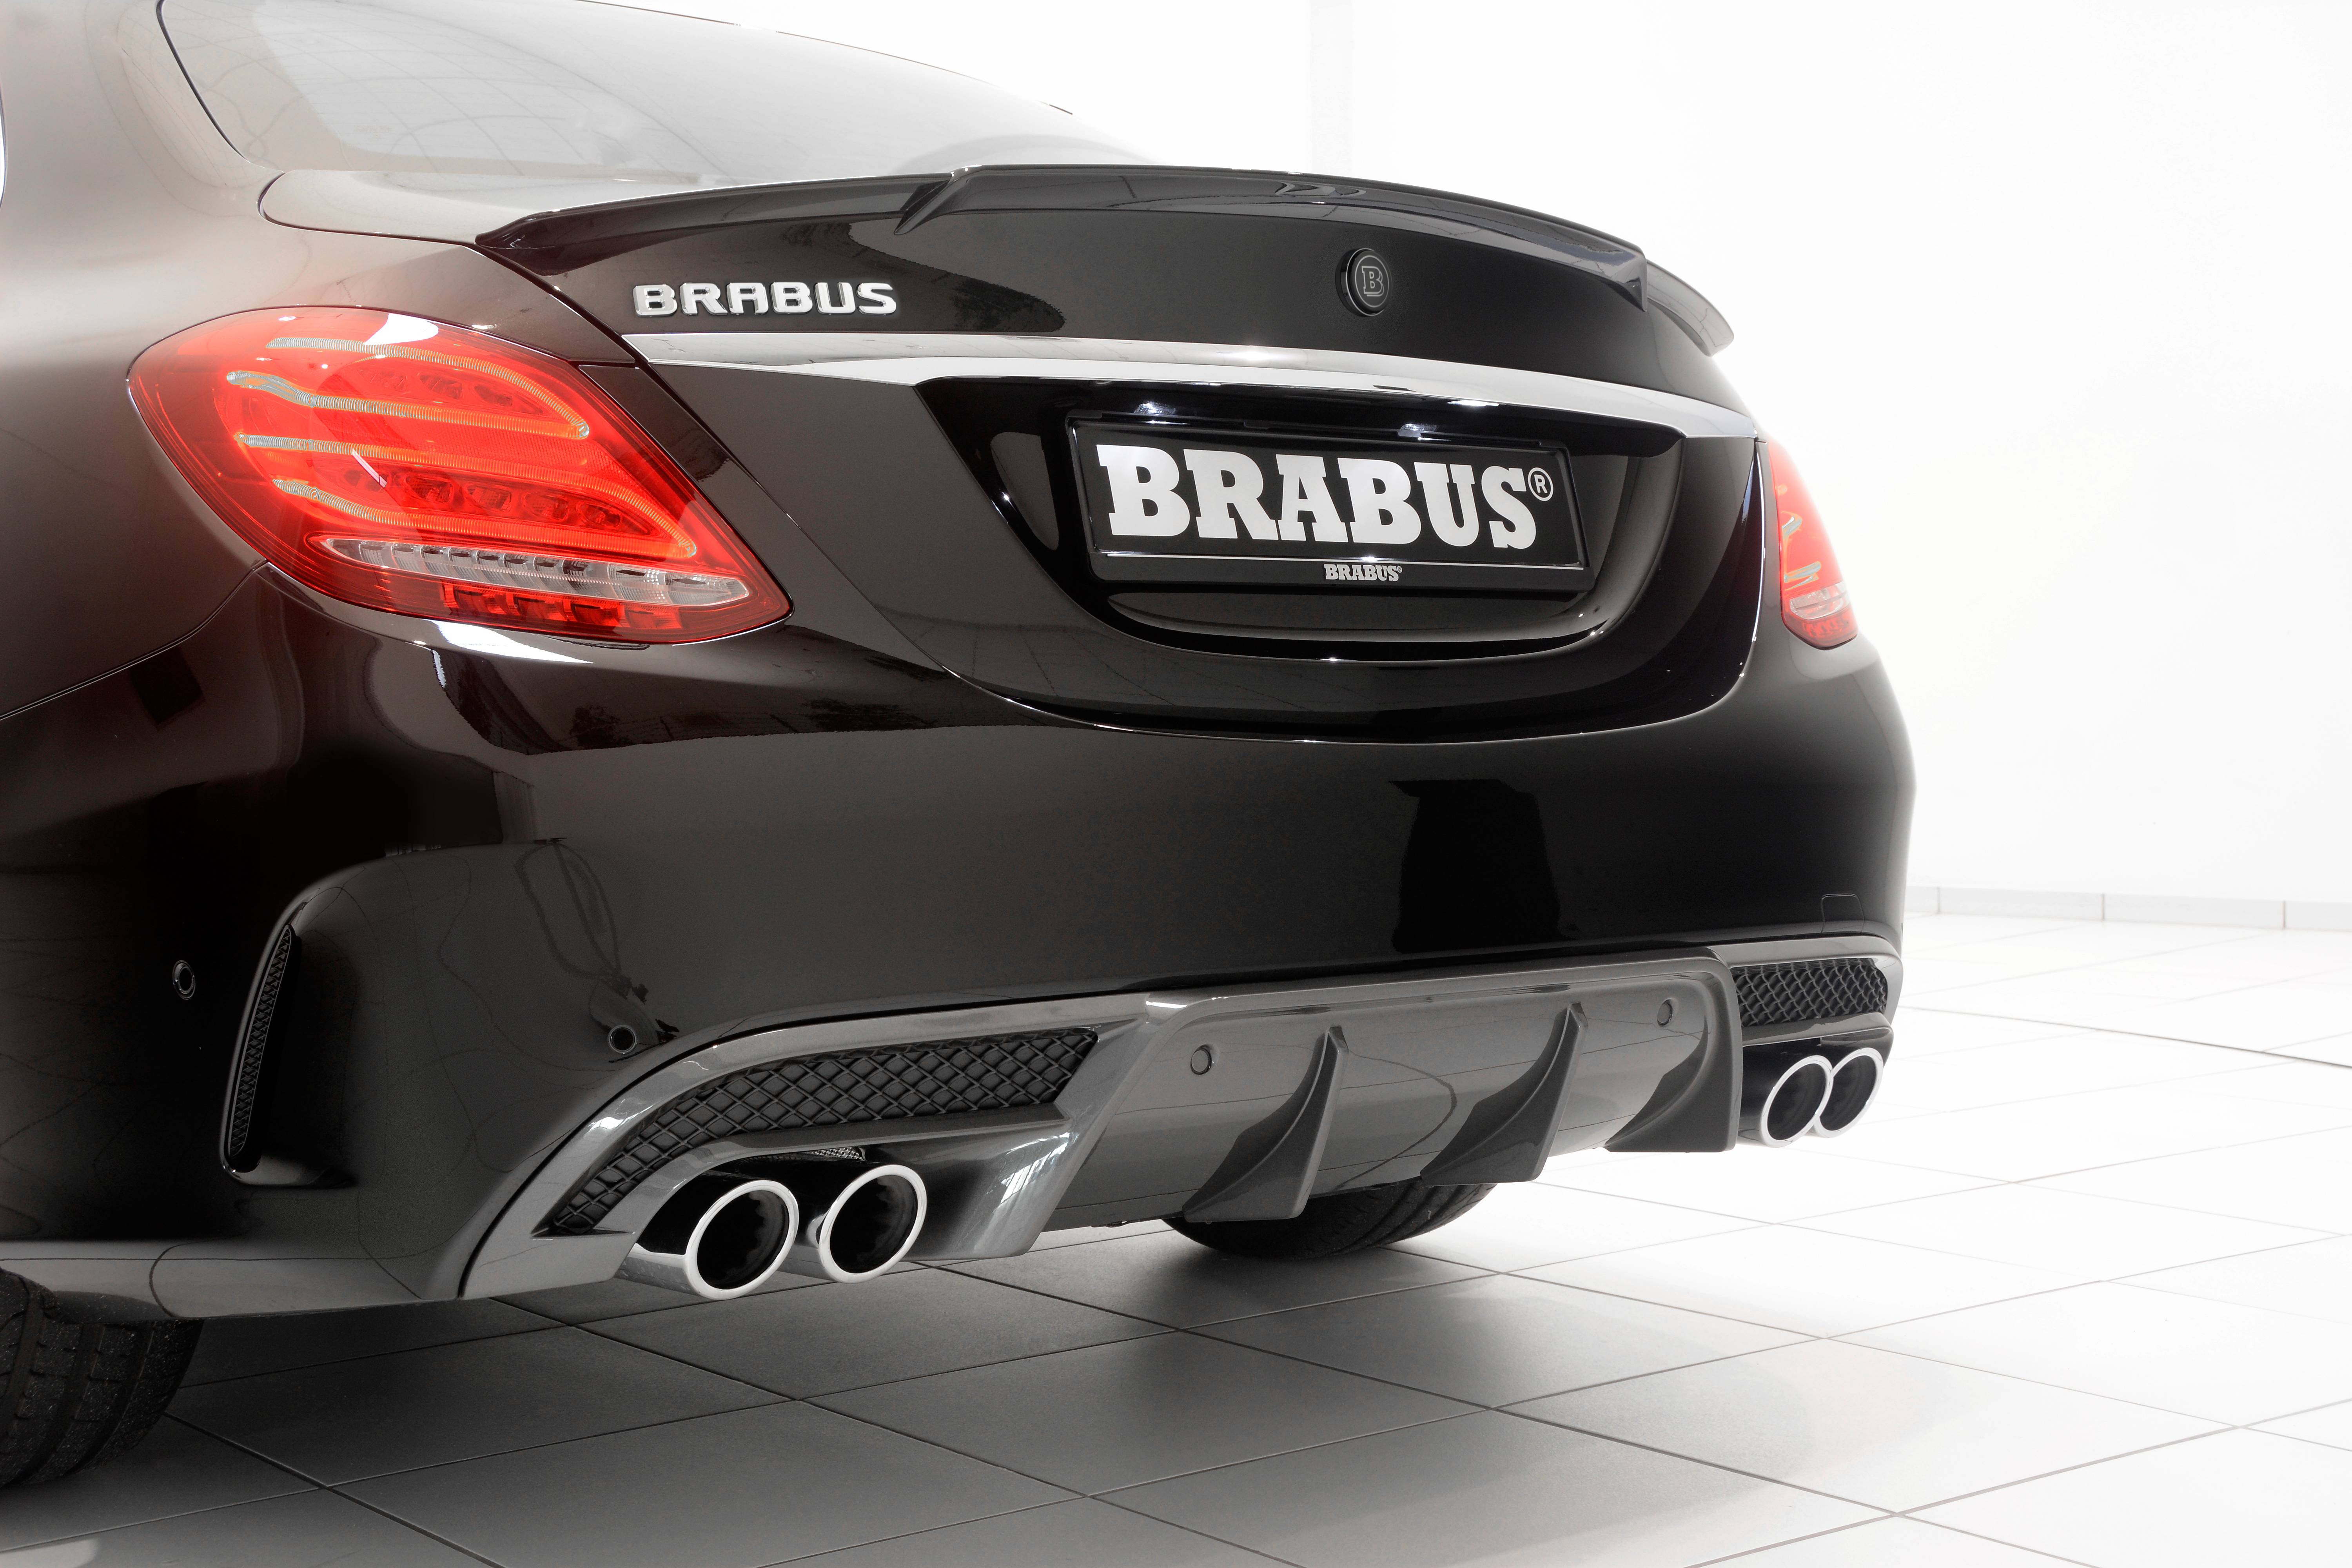 https://mbworld.org/forums/attachments/c-class-w205/394521d1501524762-3wd-brabus-w205-tuning-package-c-classw2056_zps759e89d9.jpg